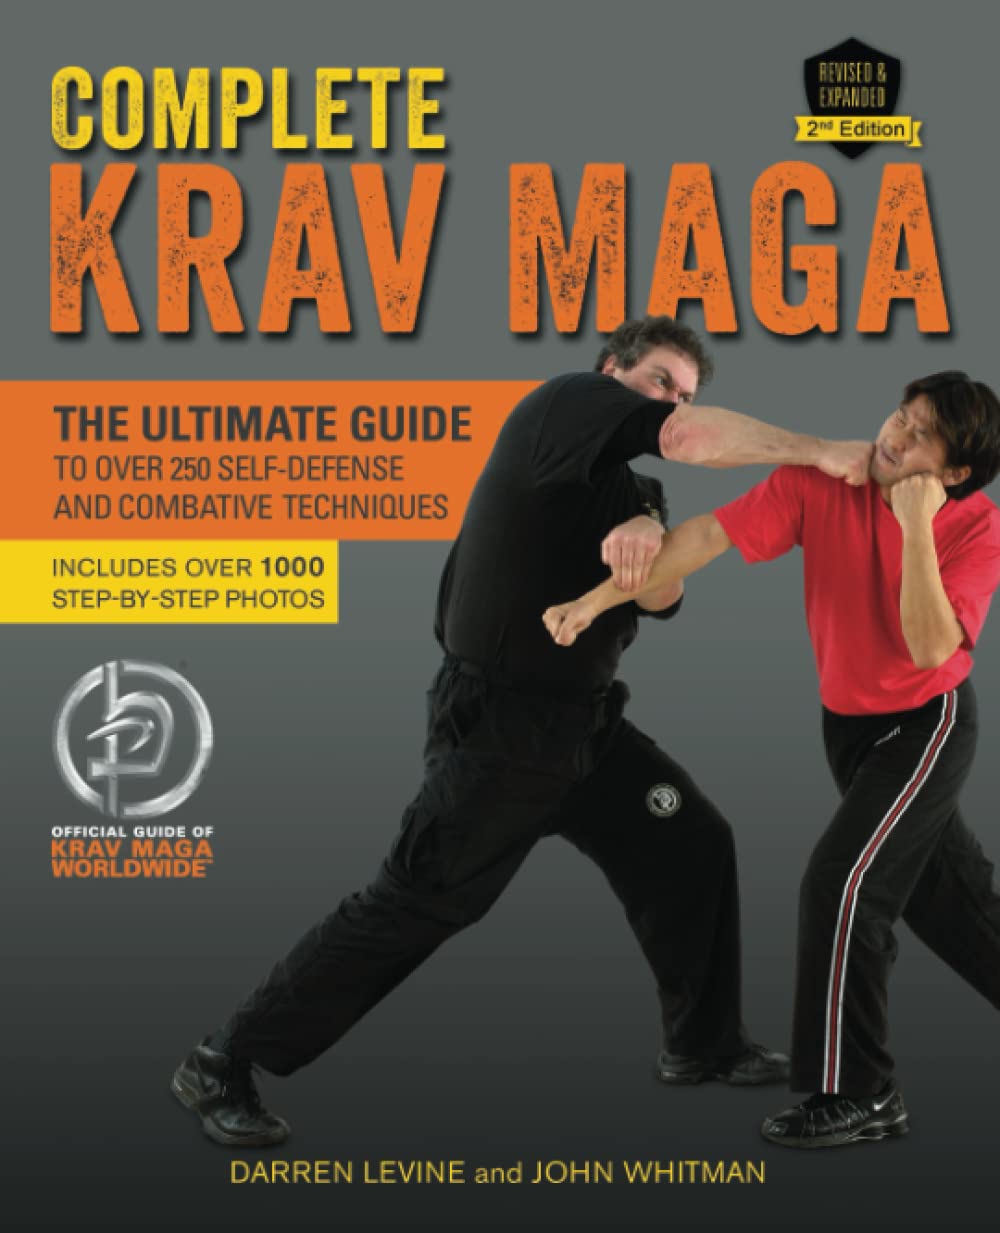 Complete Krav Maga: The Ultimate Guide to Over 250 Self-Defense & Combative Techniques Book by Darren Levine (Preowned)